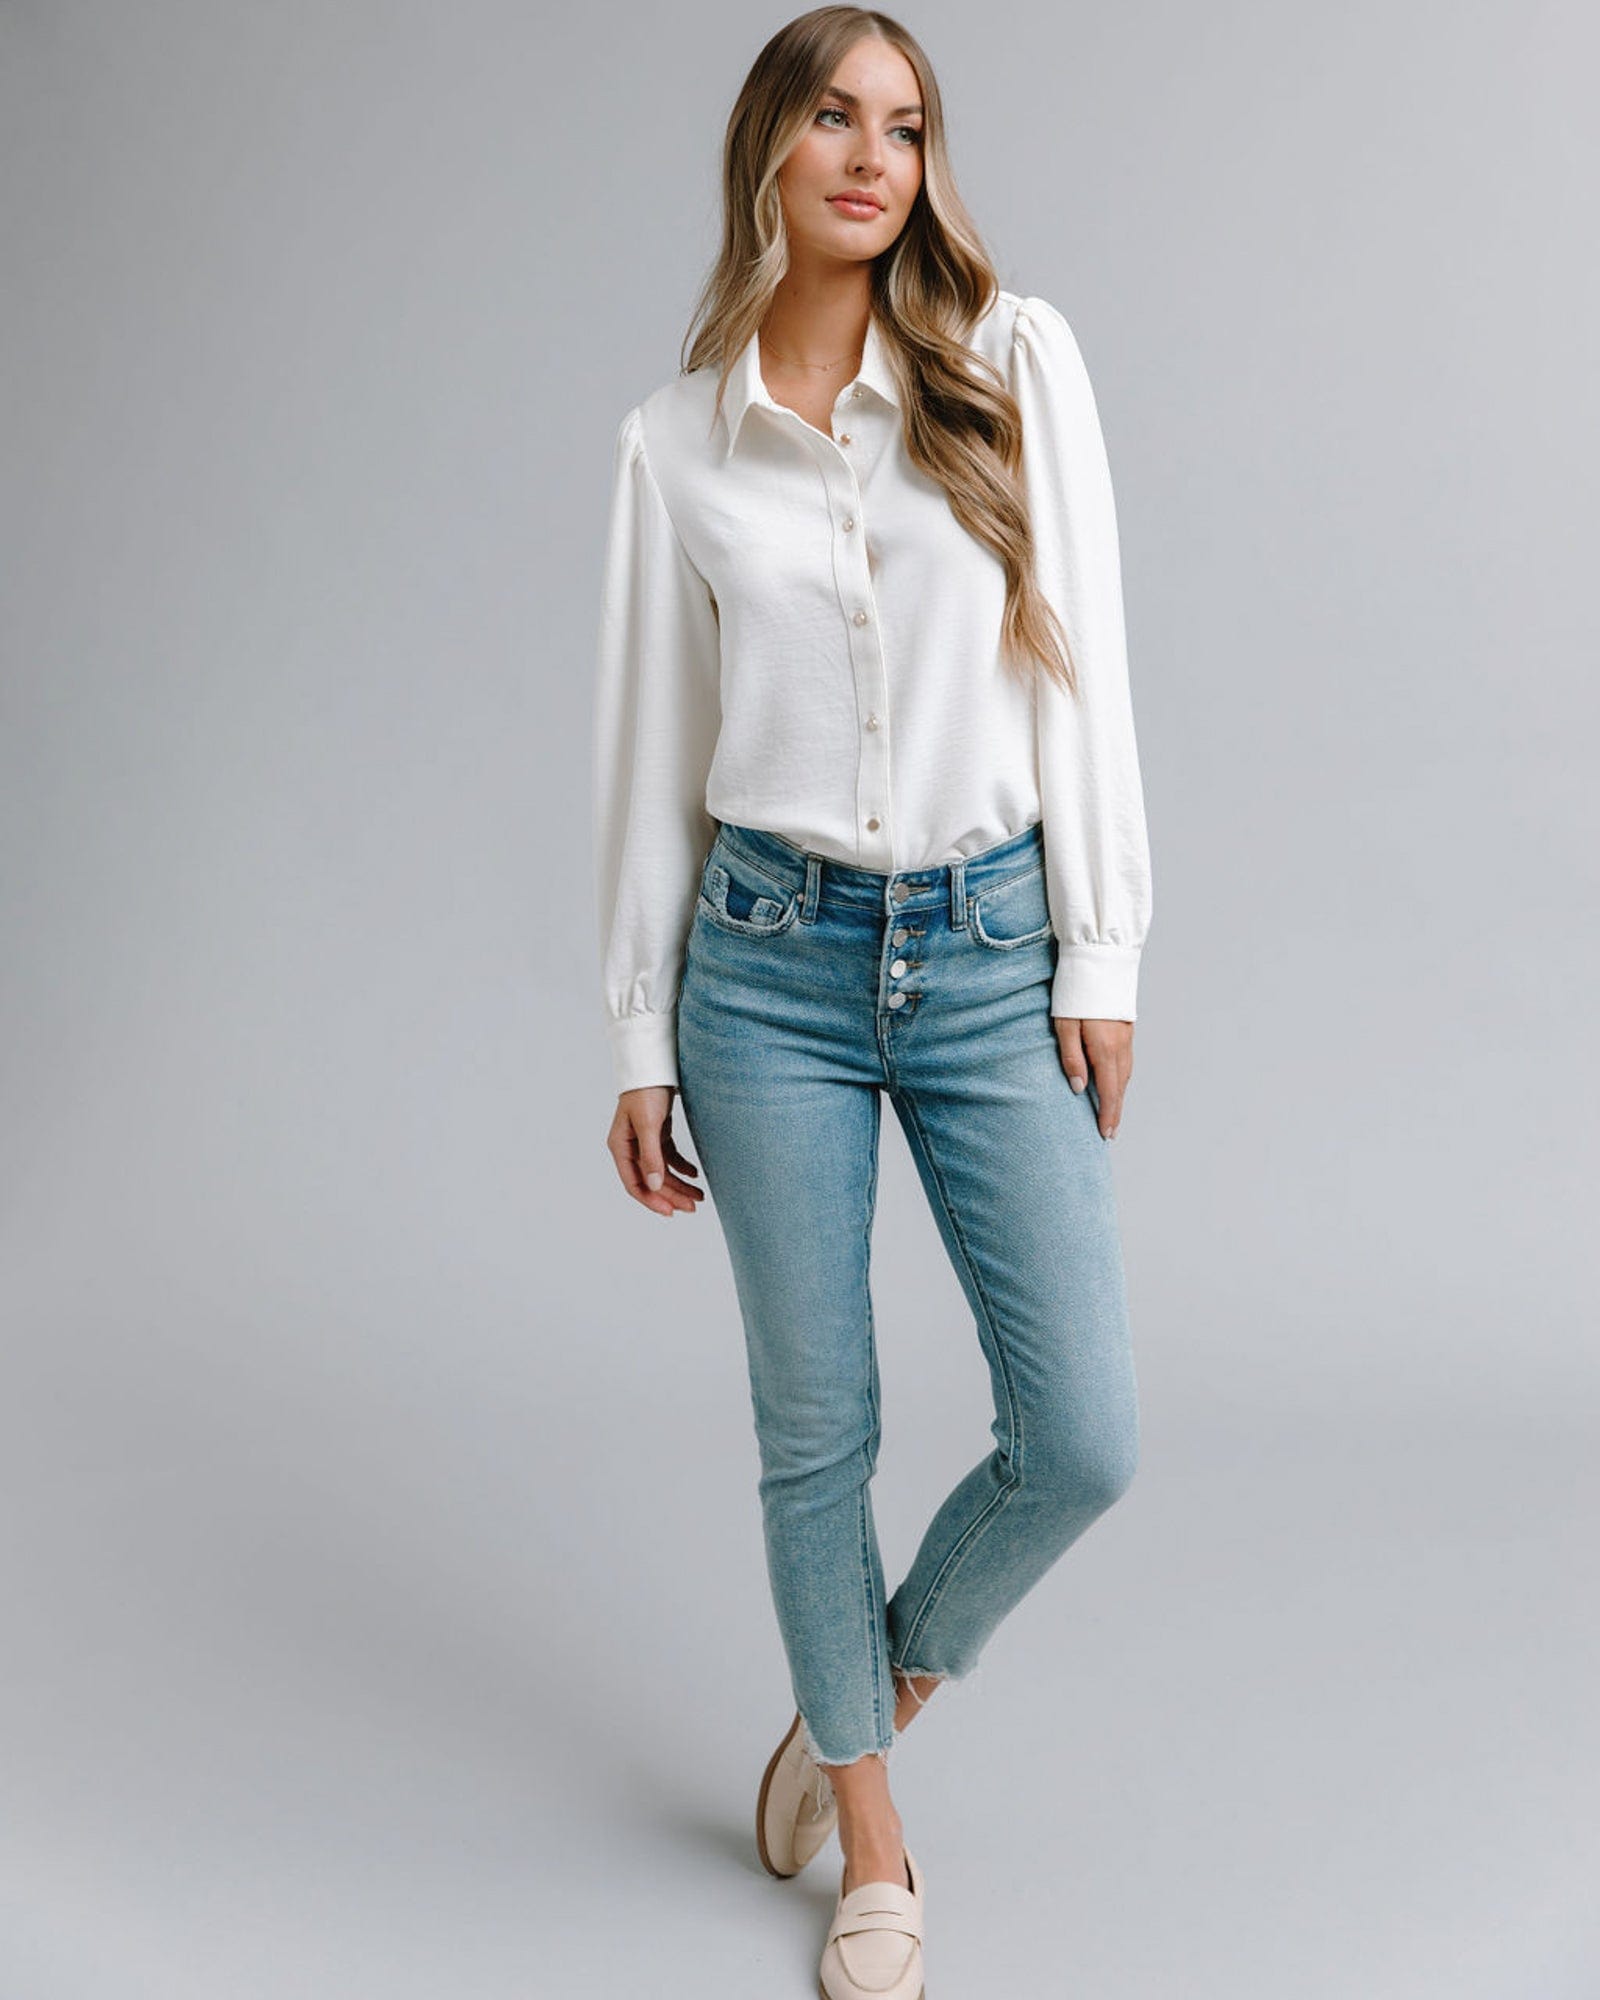 Woman in a long sleeve, collared, white button-down blouse